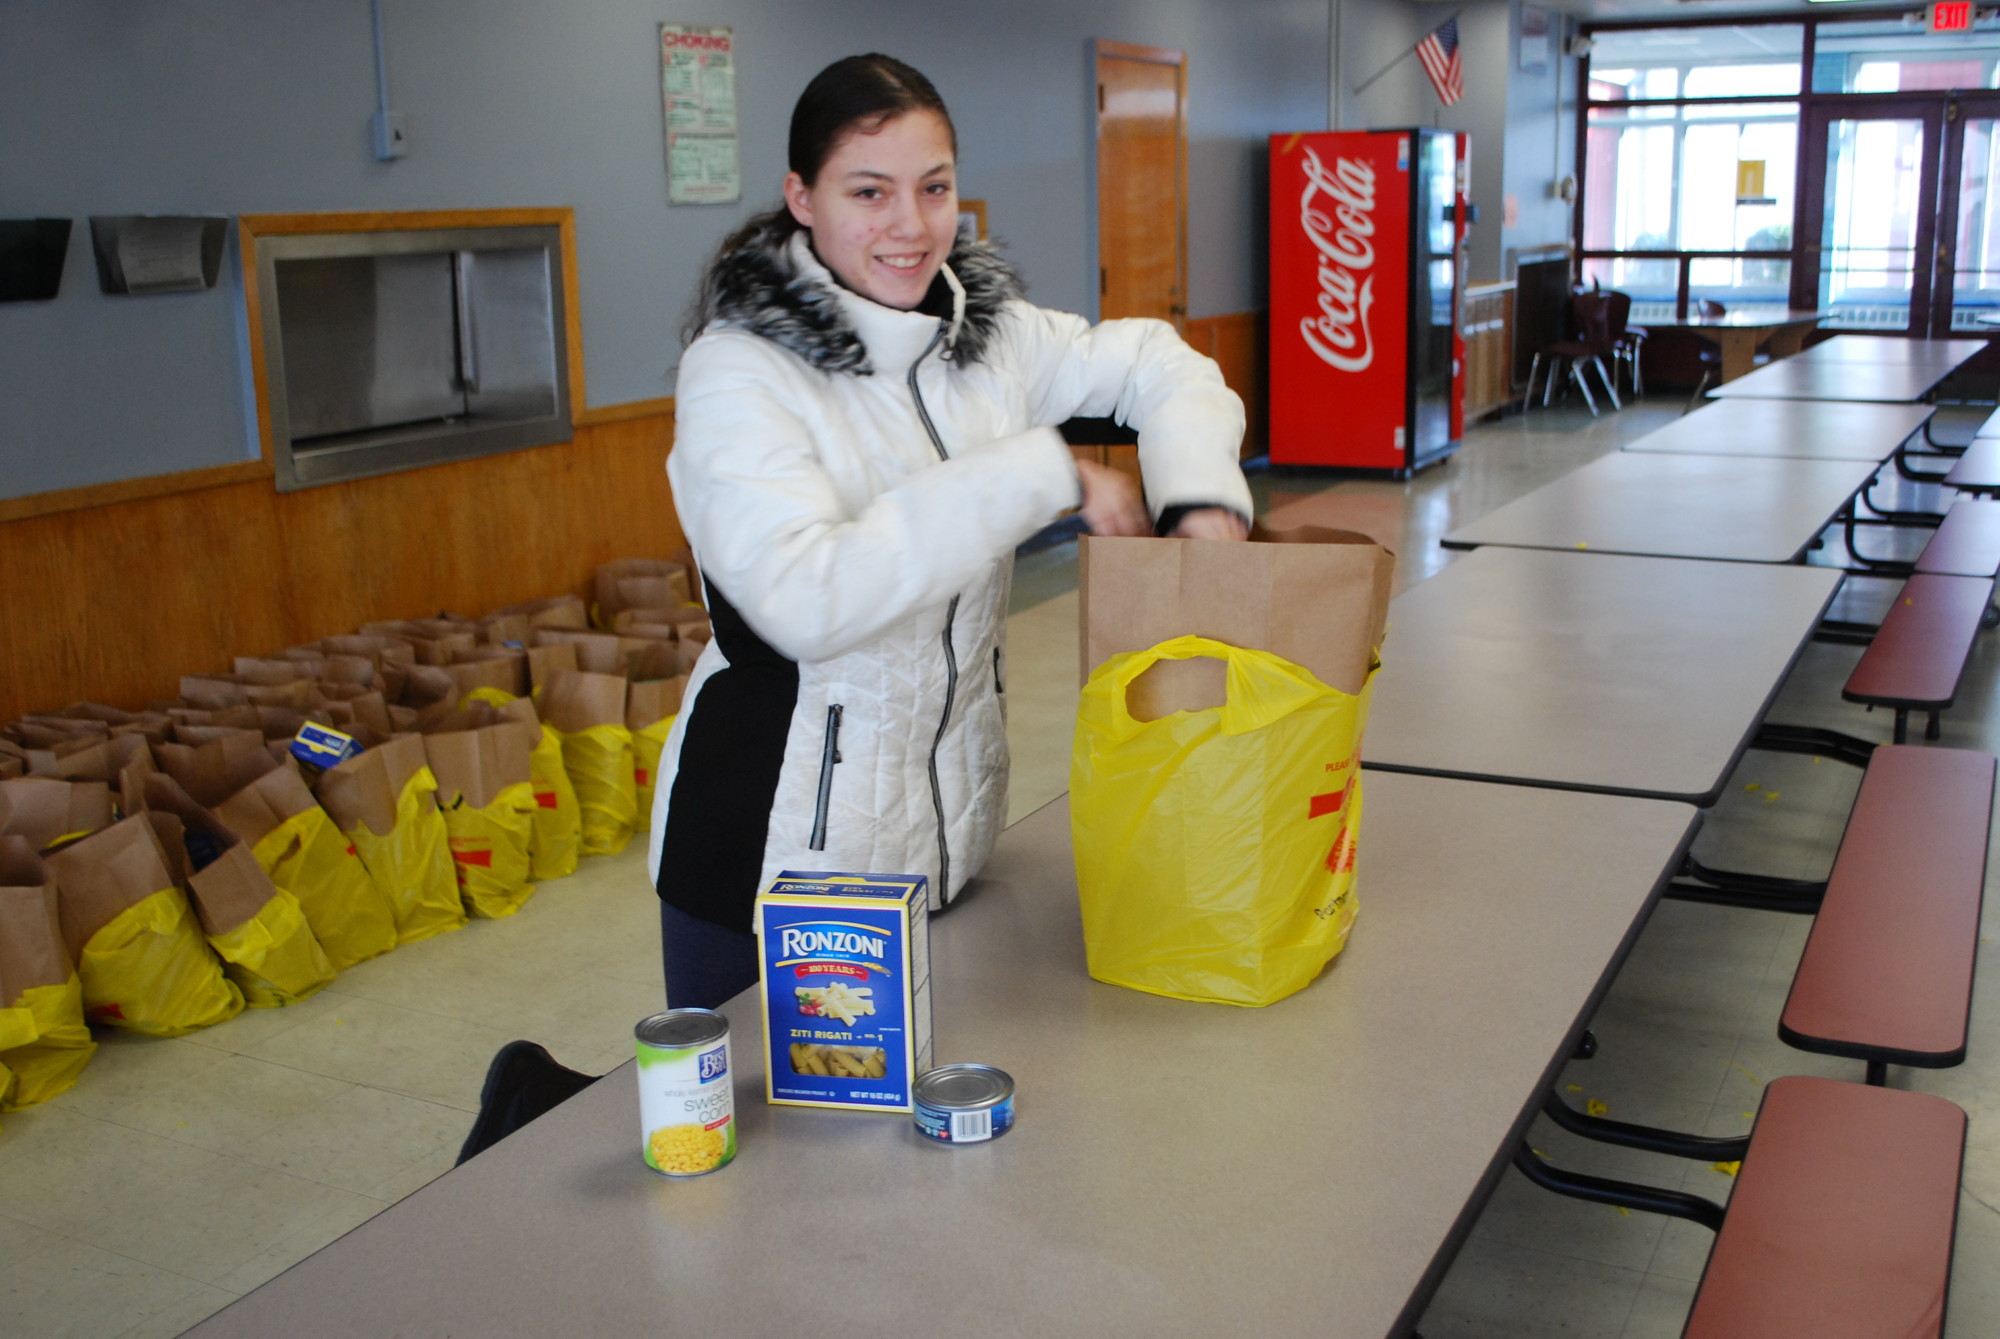 Melissa Kamper, 16, prepared a package for a family.